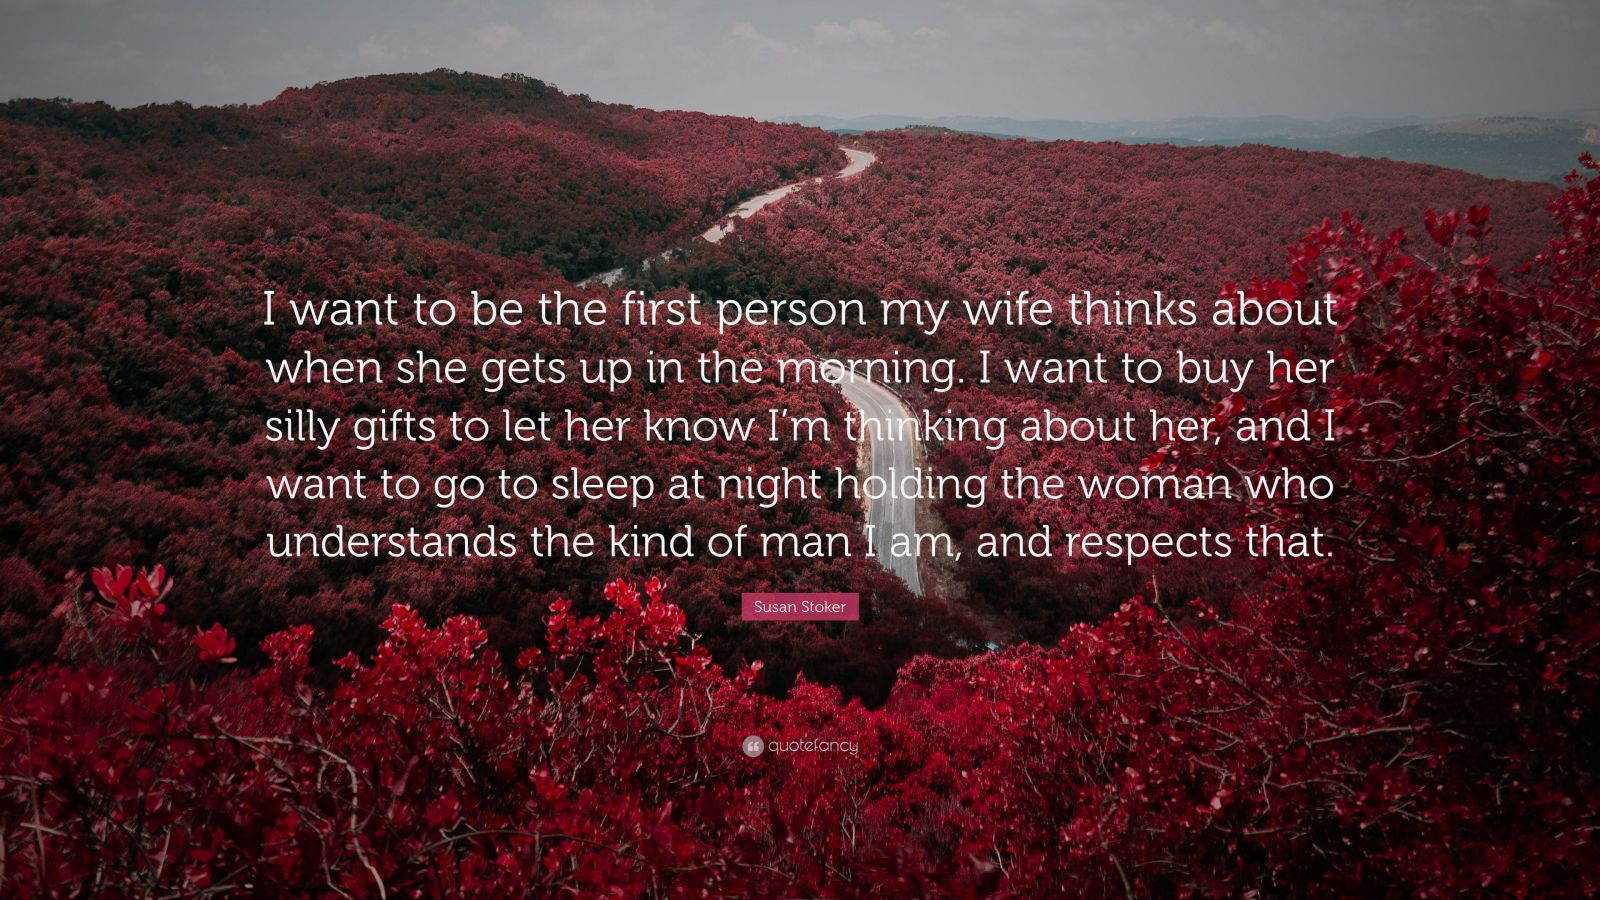 Susan Stoker Quote: “I want to be the first person my wife thinks about ...